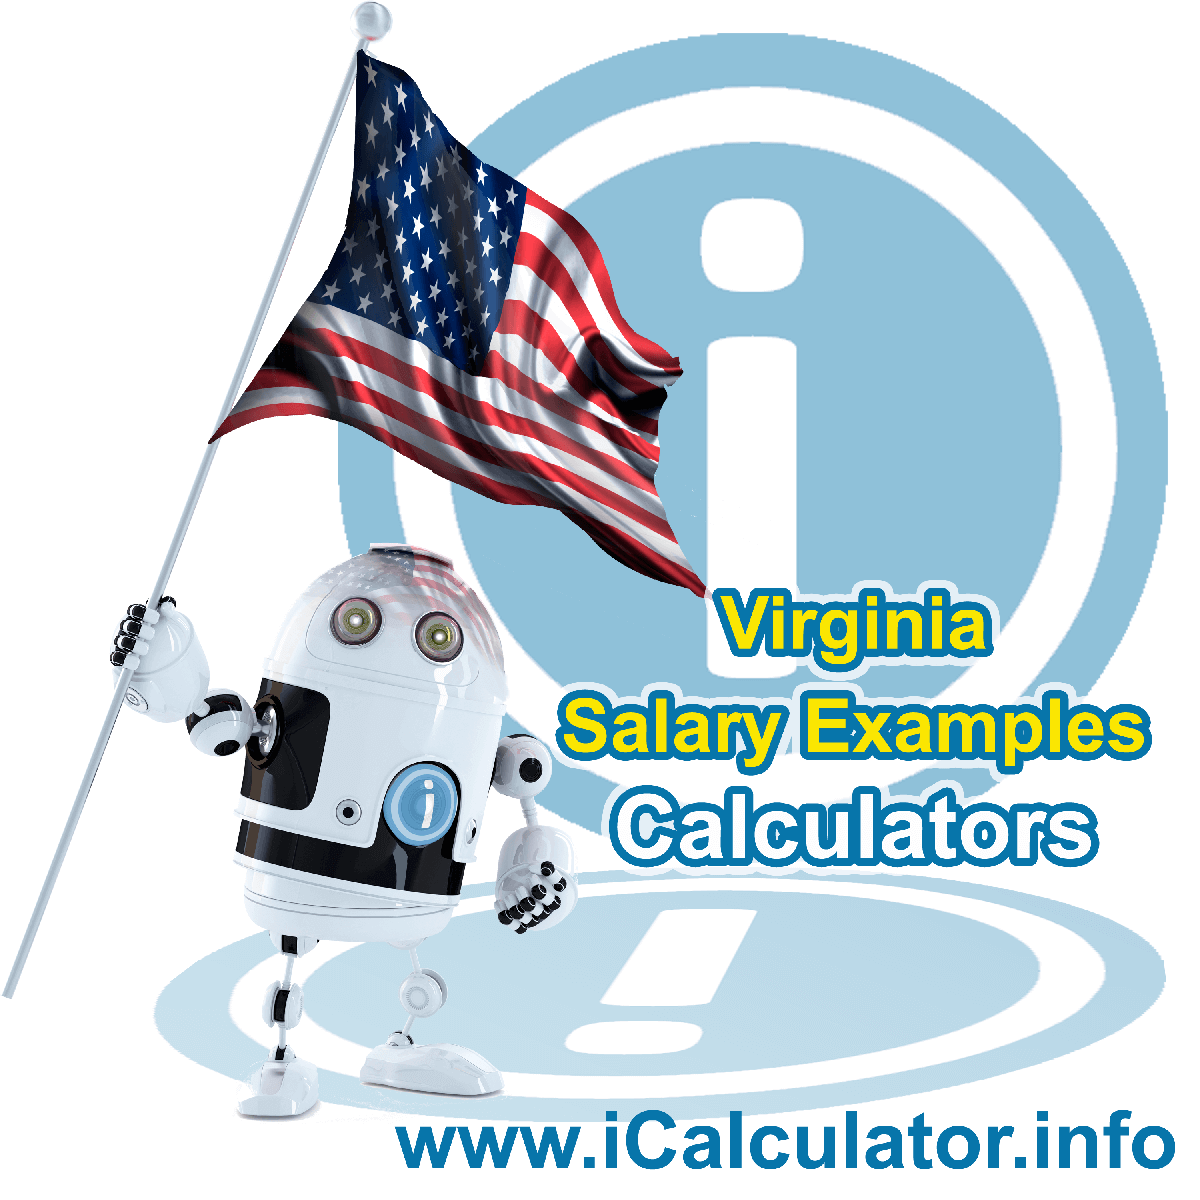 $ 140,000.00 After Tax in Virginia| iCalculator™ | $ 140,000.00 salary after tax example for 2023 tax year in Virginia. Federal and Virginia State income tax plus social security deductions and personal tax exemptions and tax allowances for 2023 